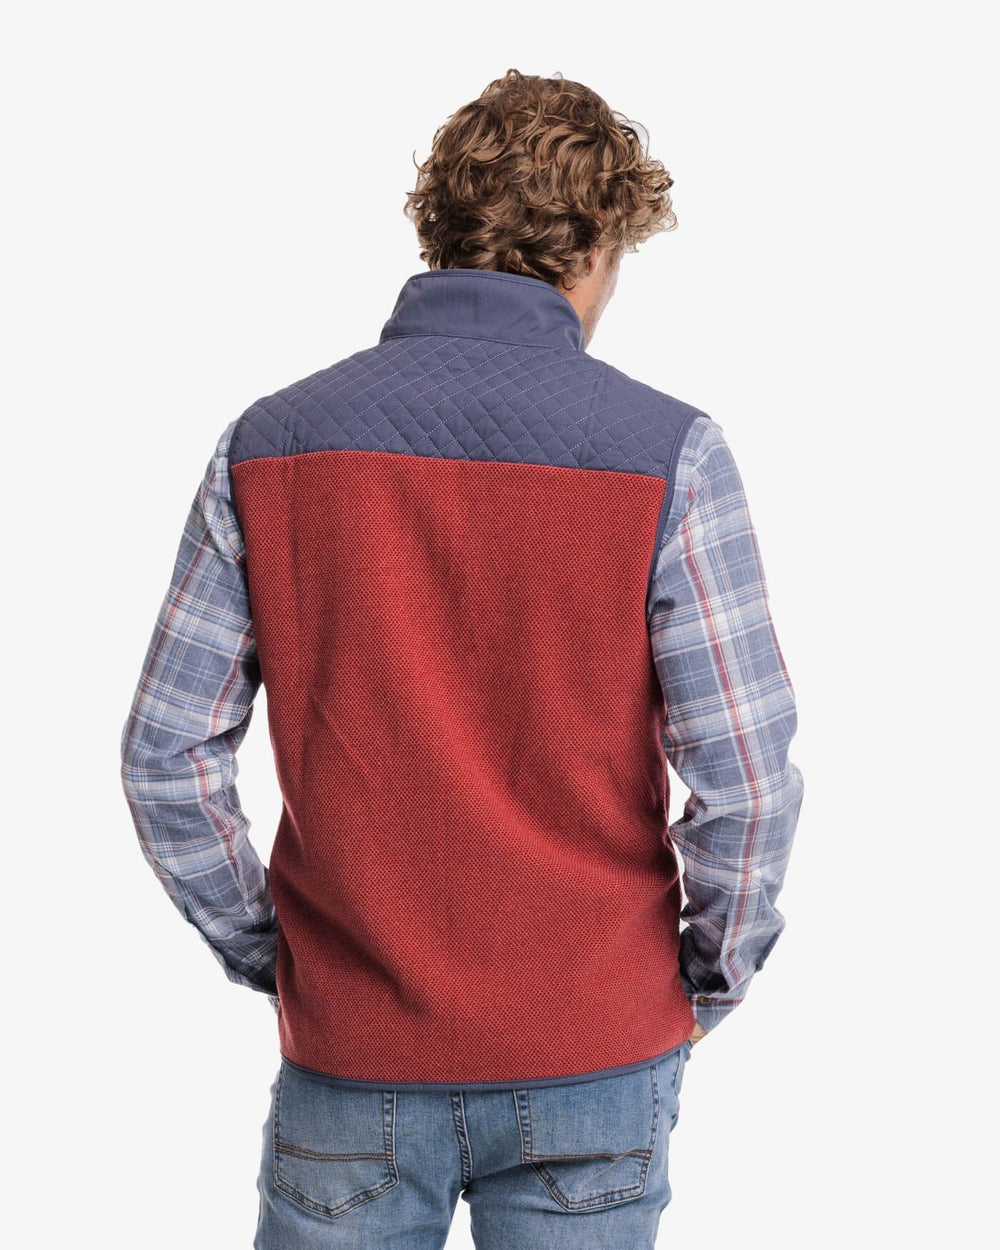 The back view of the Southern Tide Hucksley Vest by Southern Tide - Tuscany Red